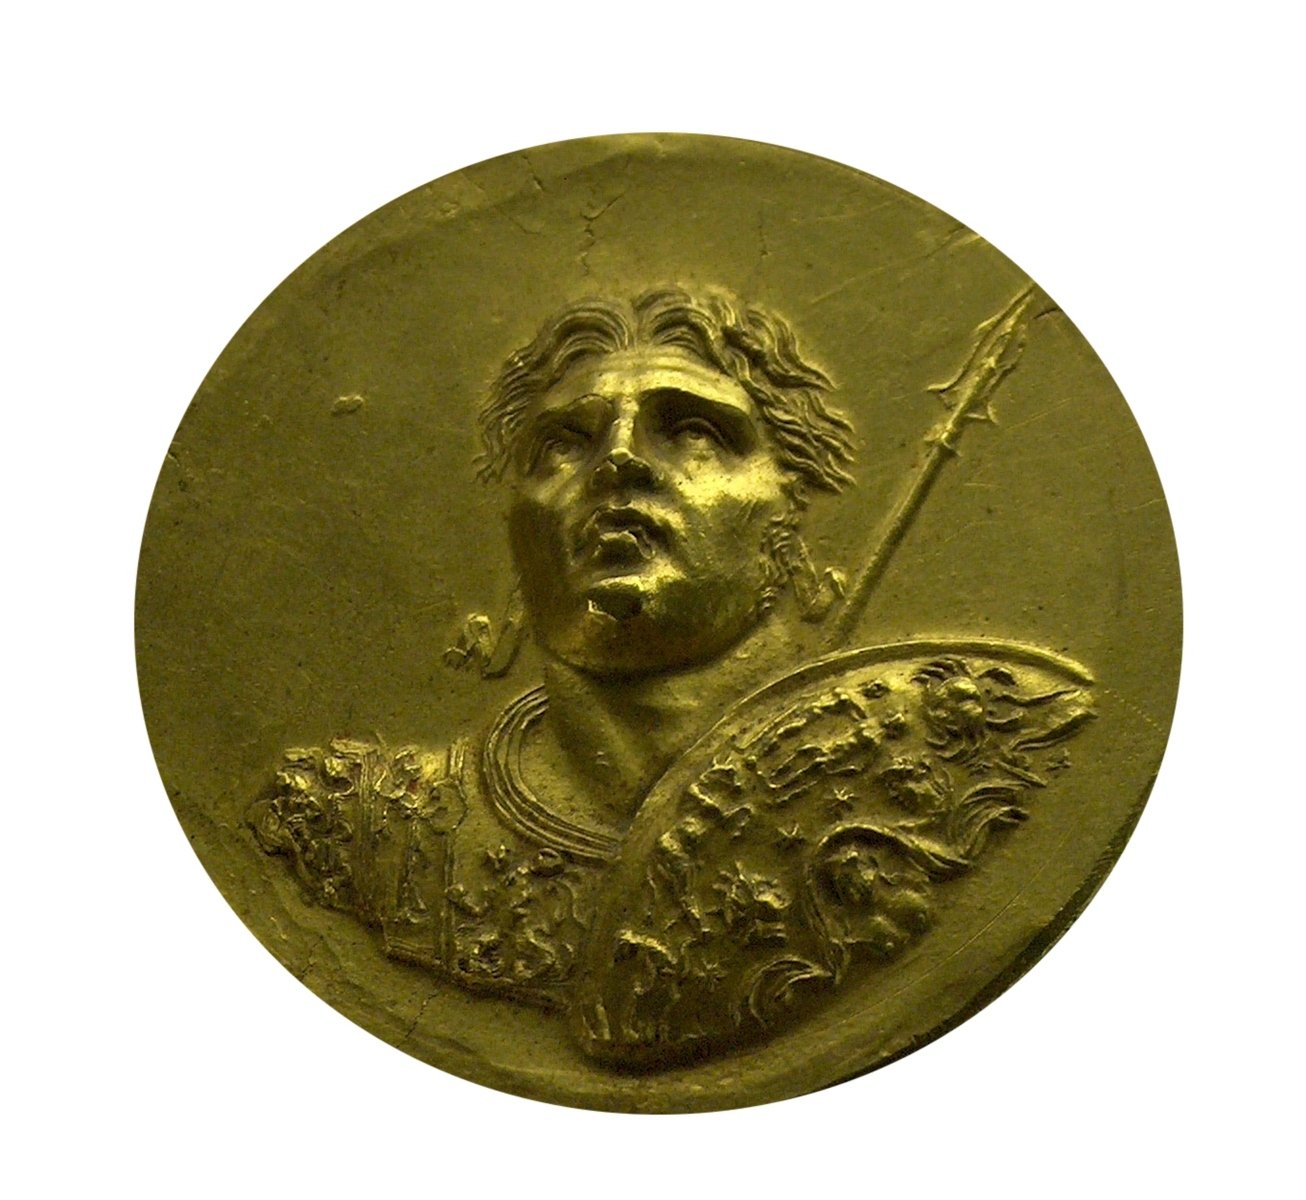 a bronze medal depicting a man with a sword